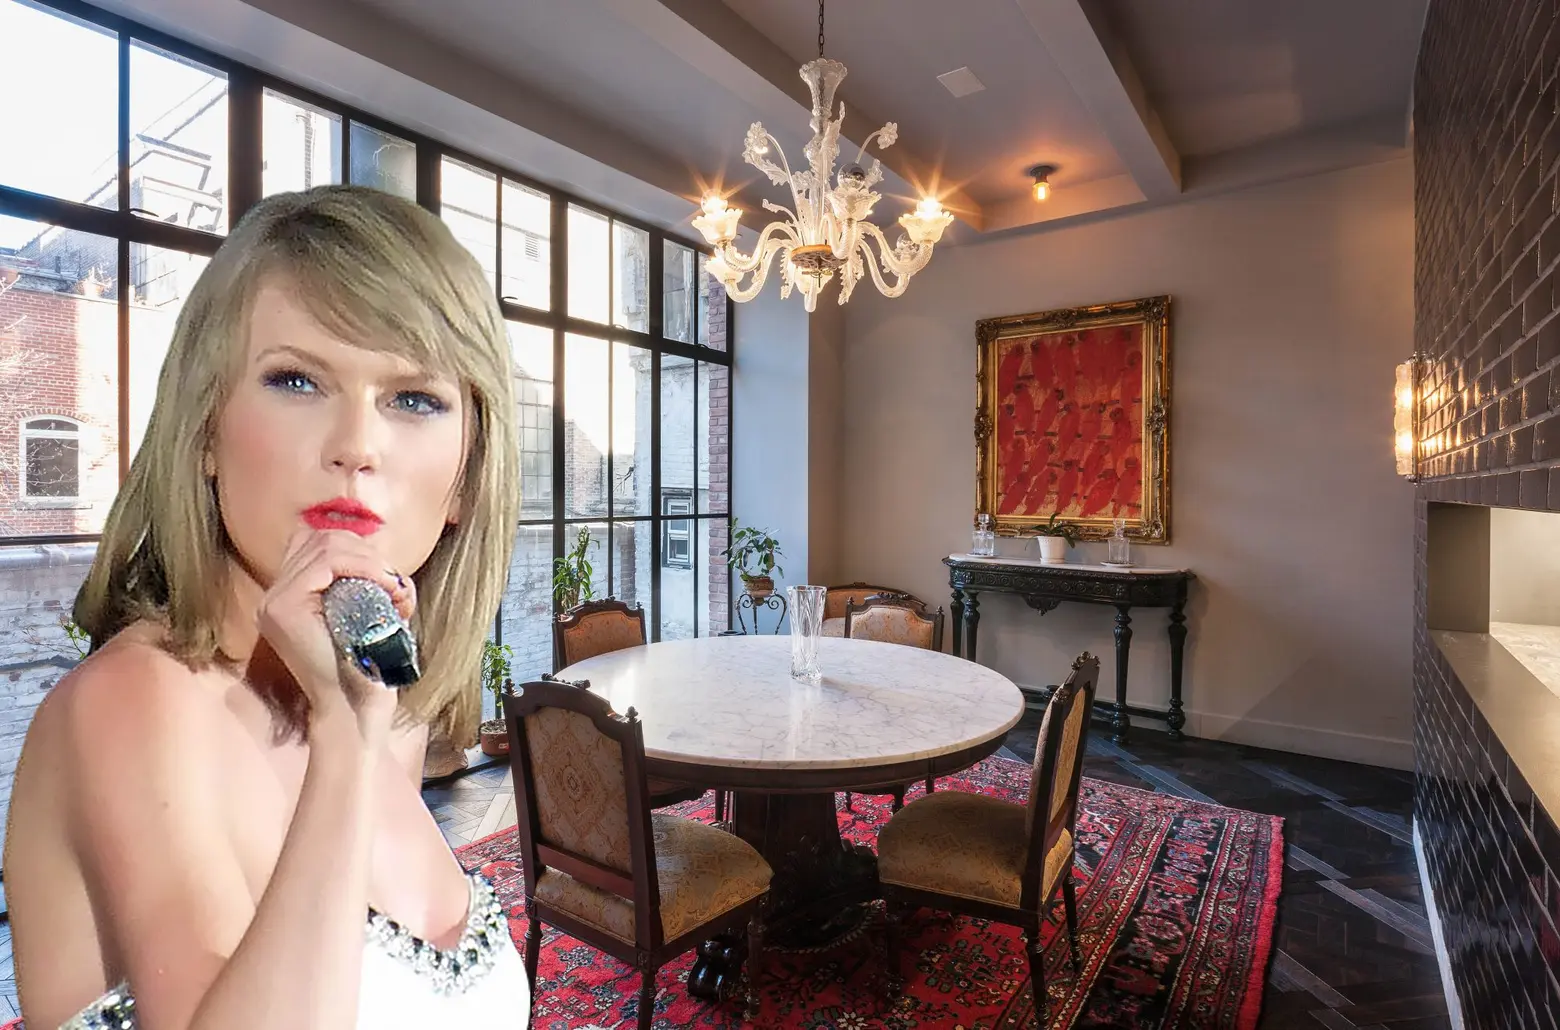 You Can Now Rent Taylor Swift's Old NYC Home That Inspired A Song